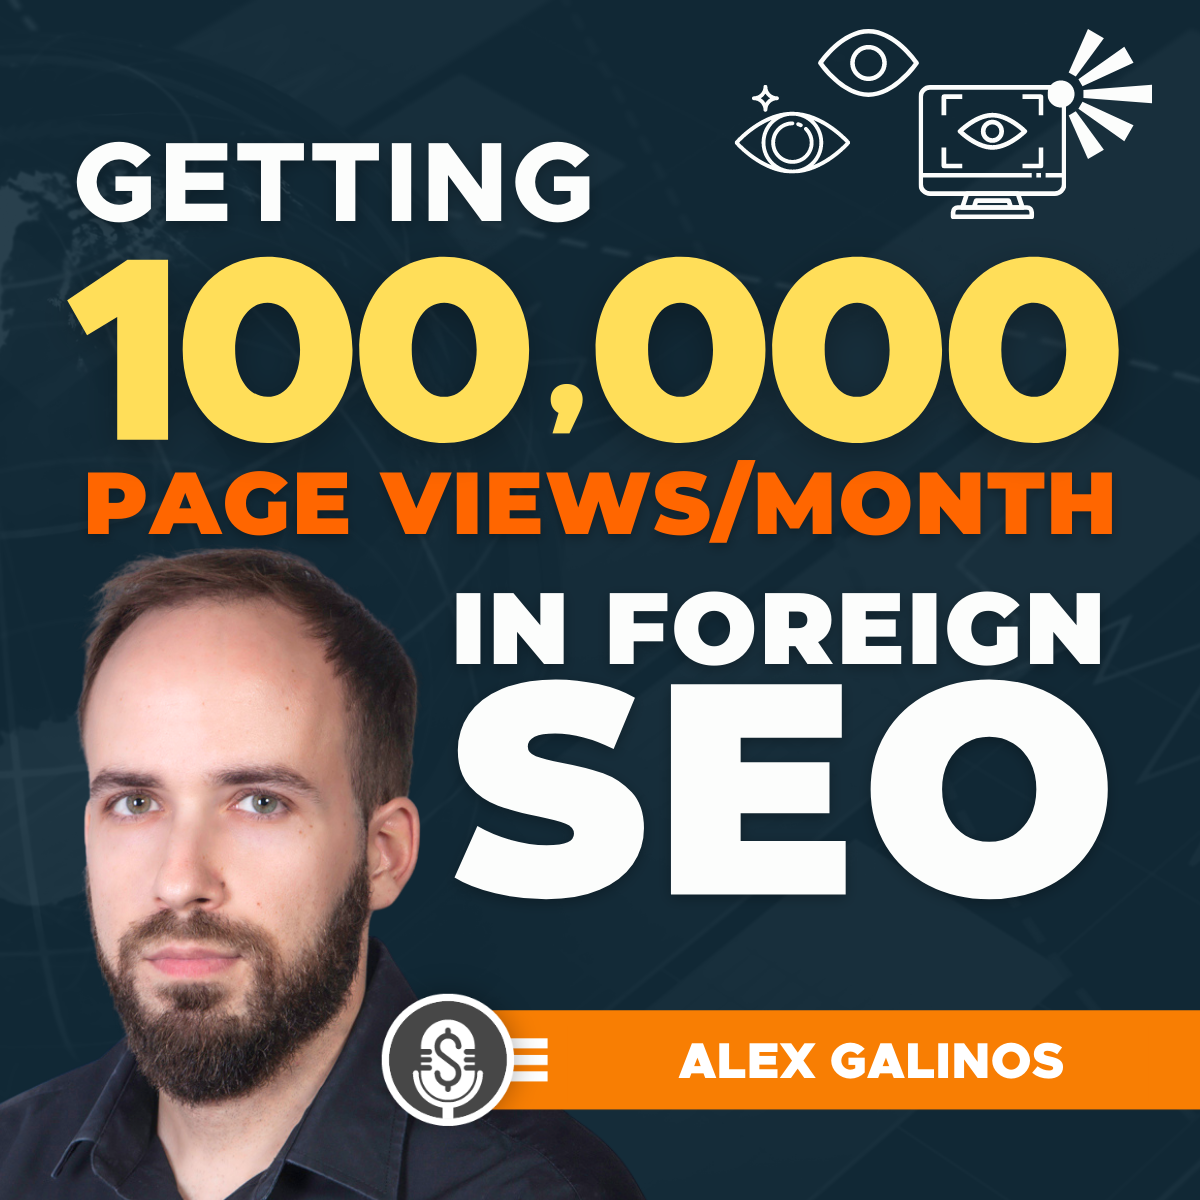 Alex Galinos on getting 100,000 page views/month in foreign SEO